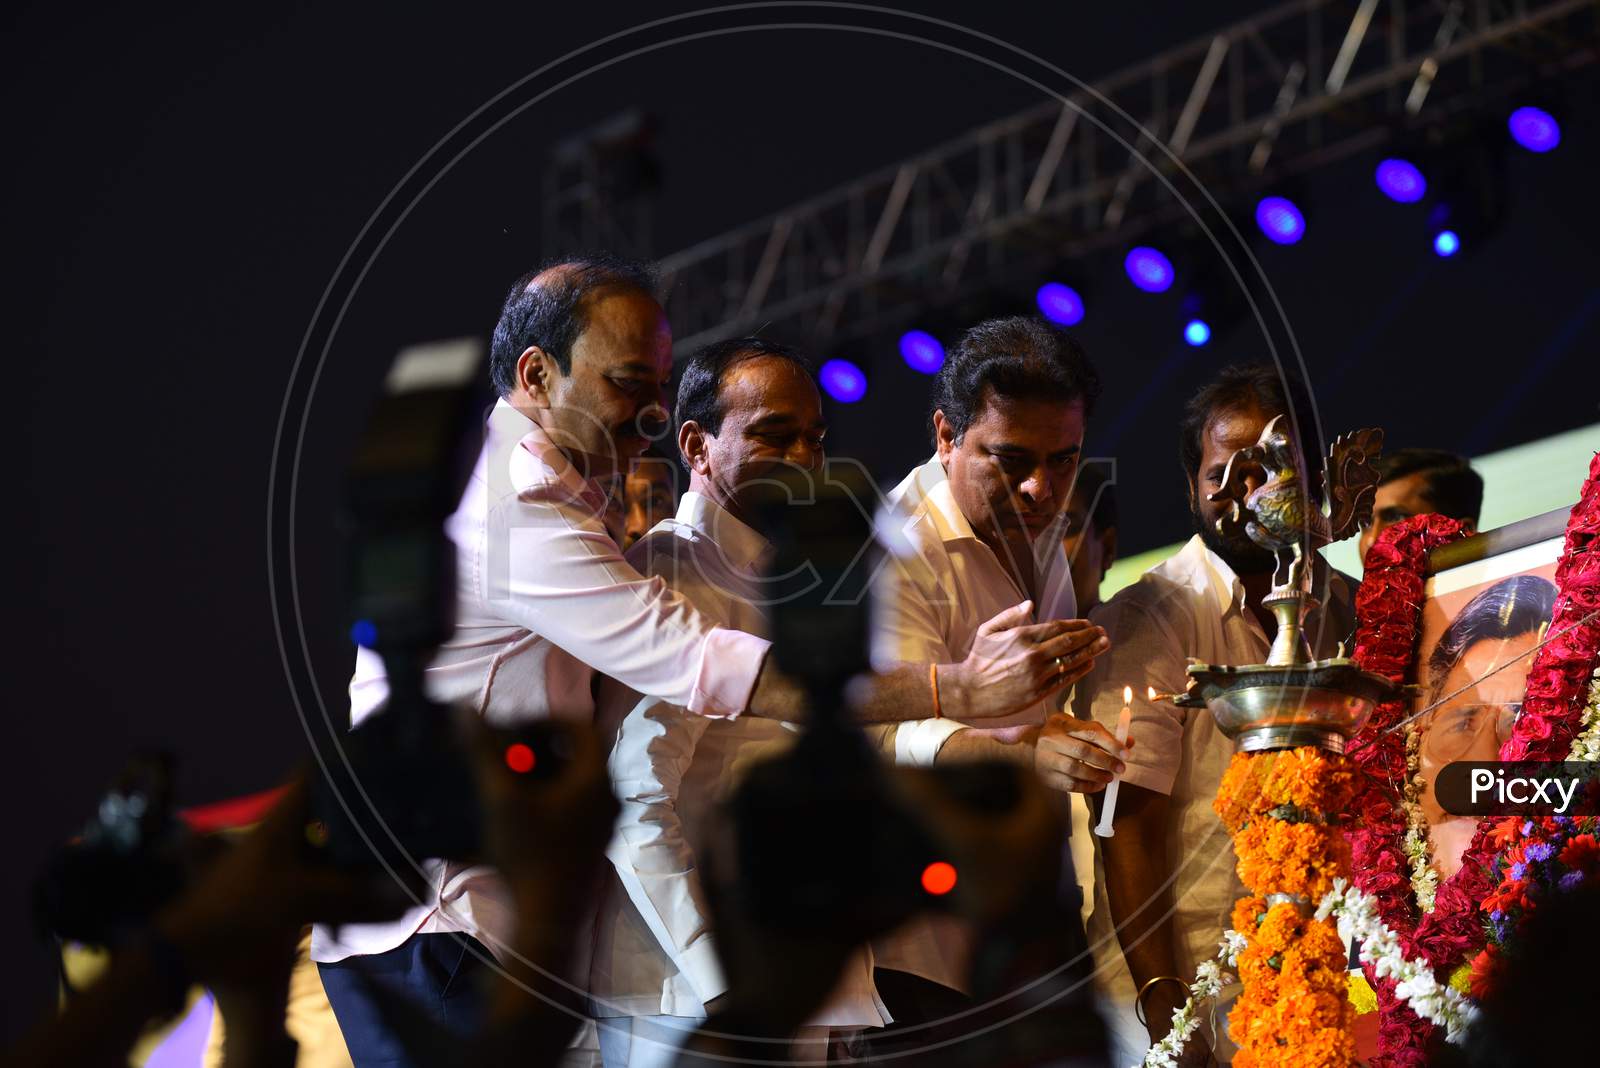 Telangana Ministers Etela Rajender and K. T. Rama Rao  Attending An Event